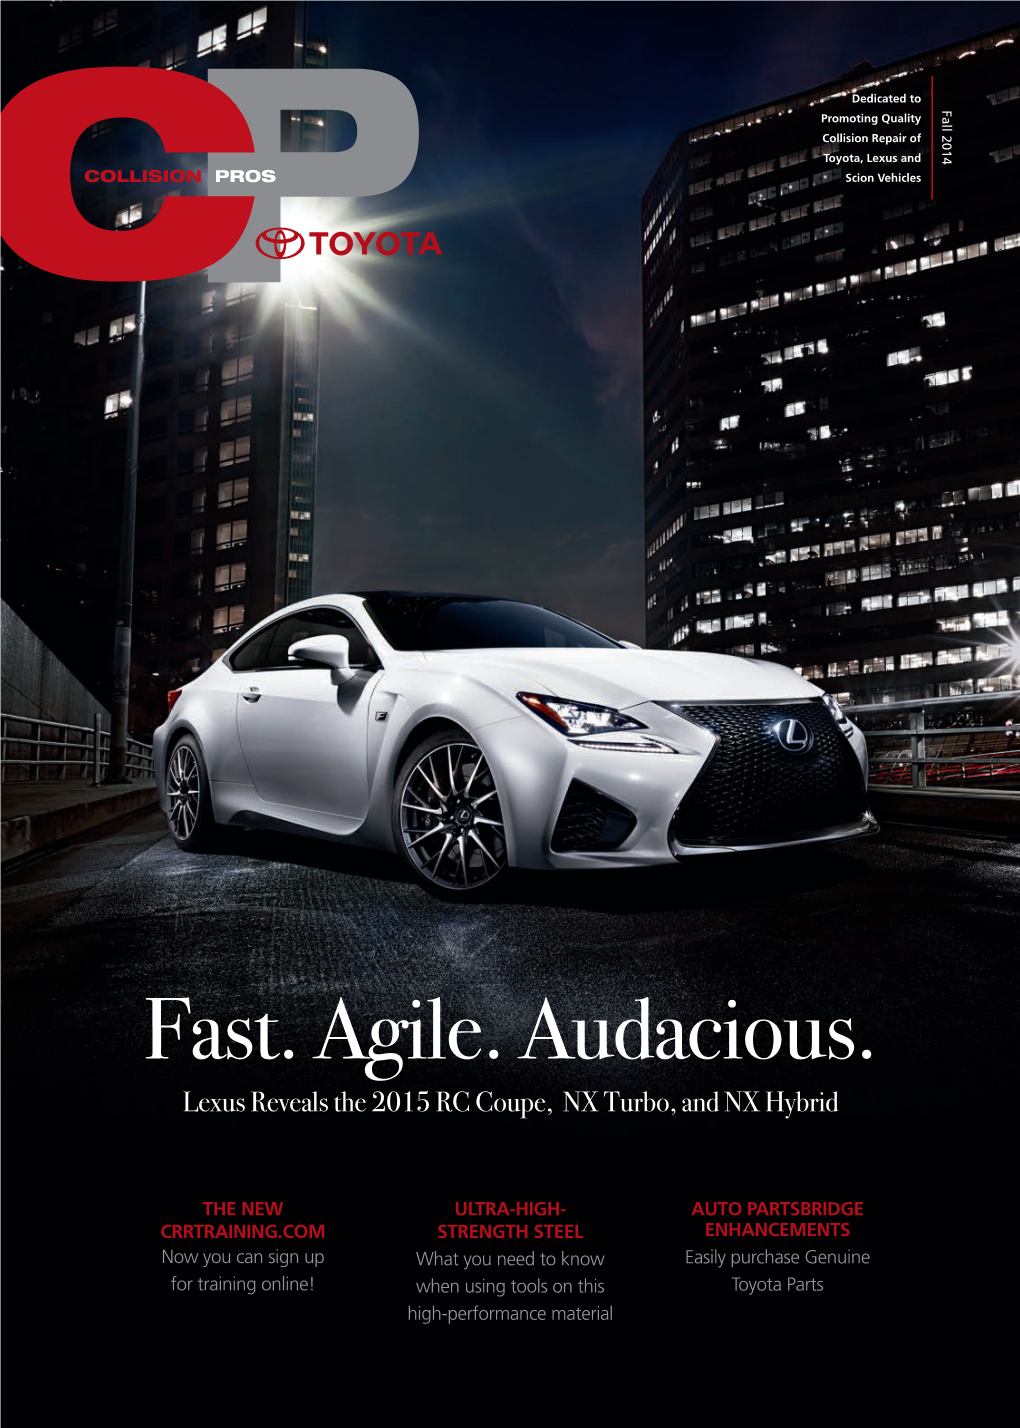 Fast. Agile. Audacious. Lexus Reveals the 2015 RC Coupe, NX Turbo, and NX Hybrid